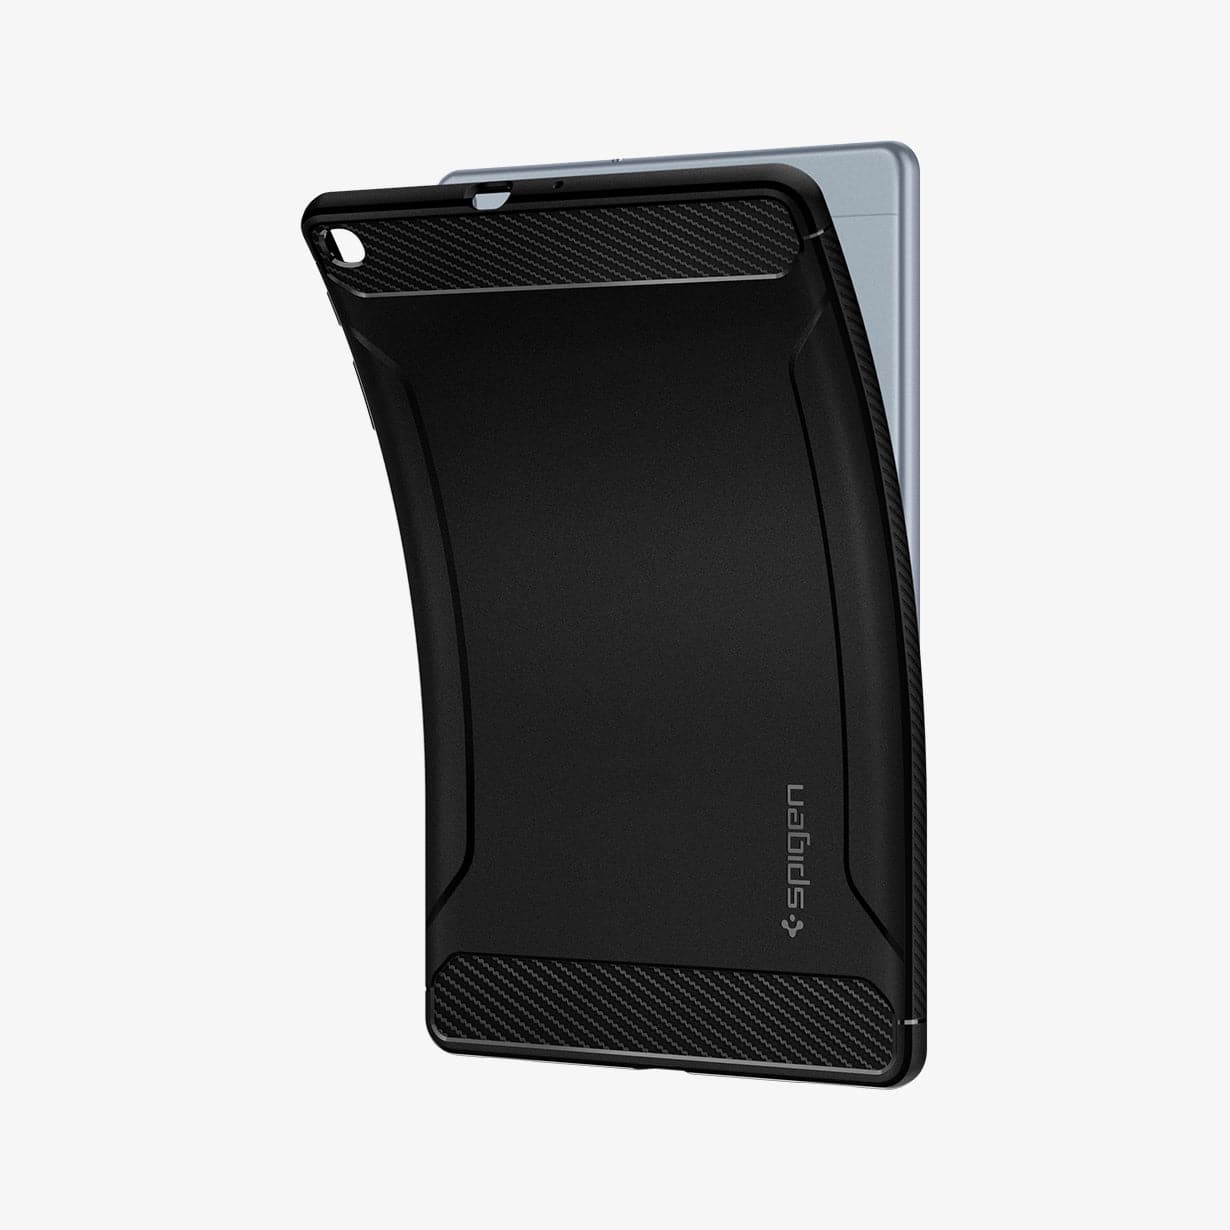 623CS26448 - Galaxy Tab A 10.1" Case Rugged Armor in matte black showing the back with case bending away from device to show the flexibility